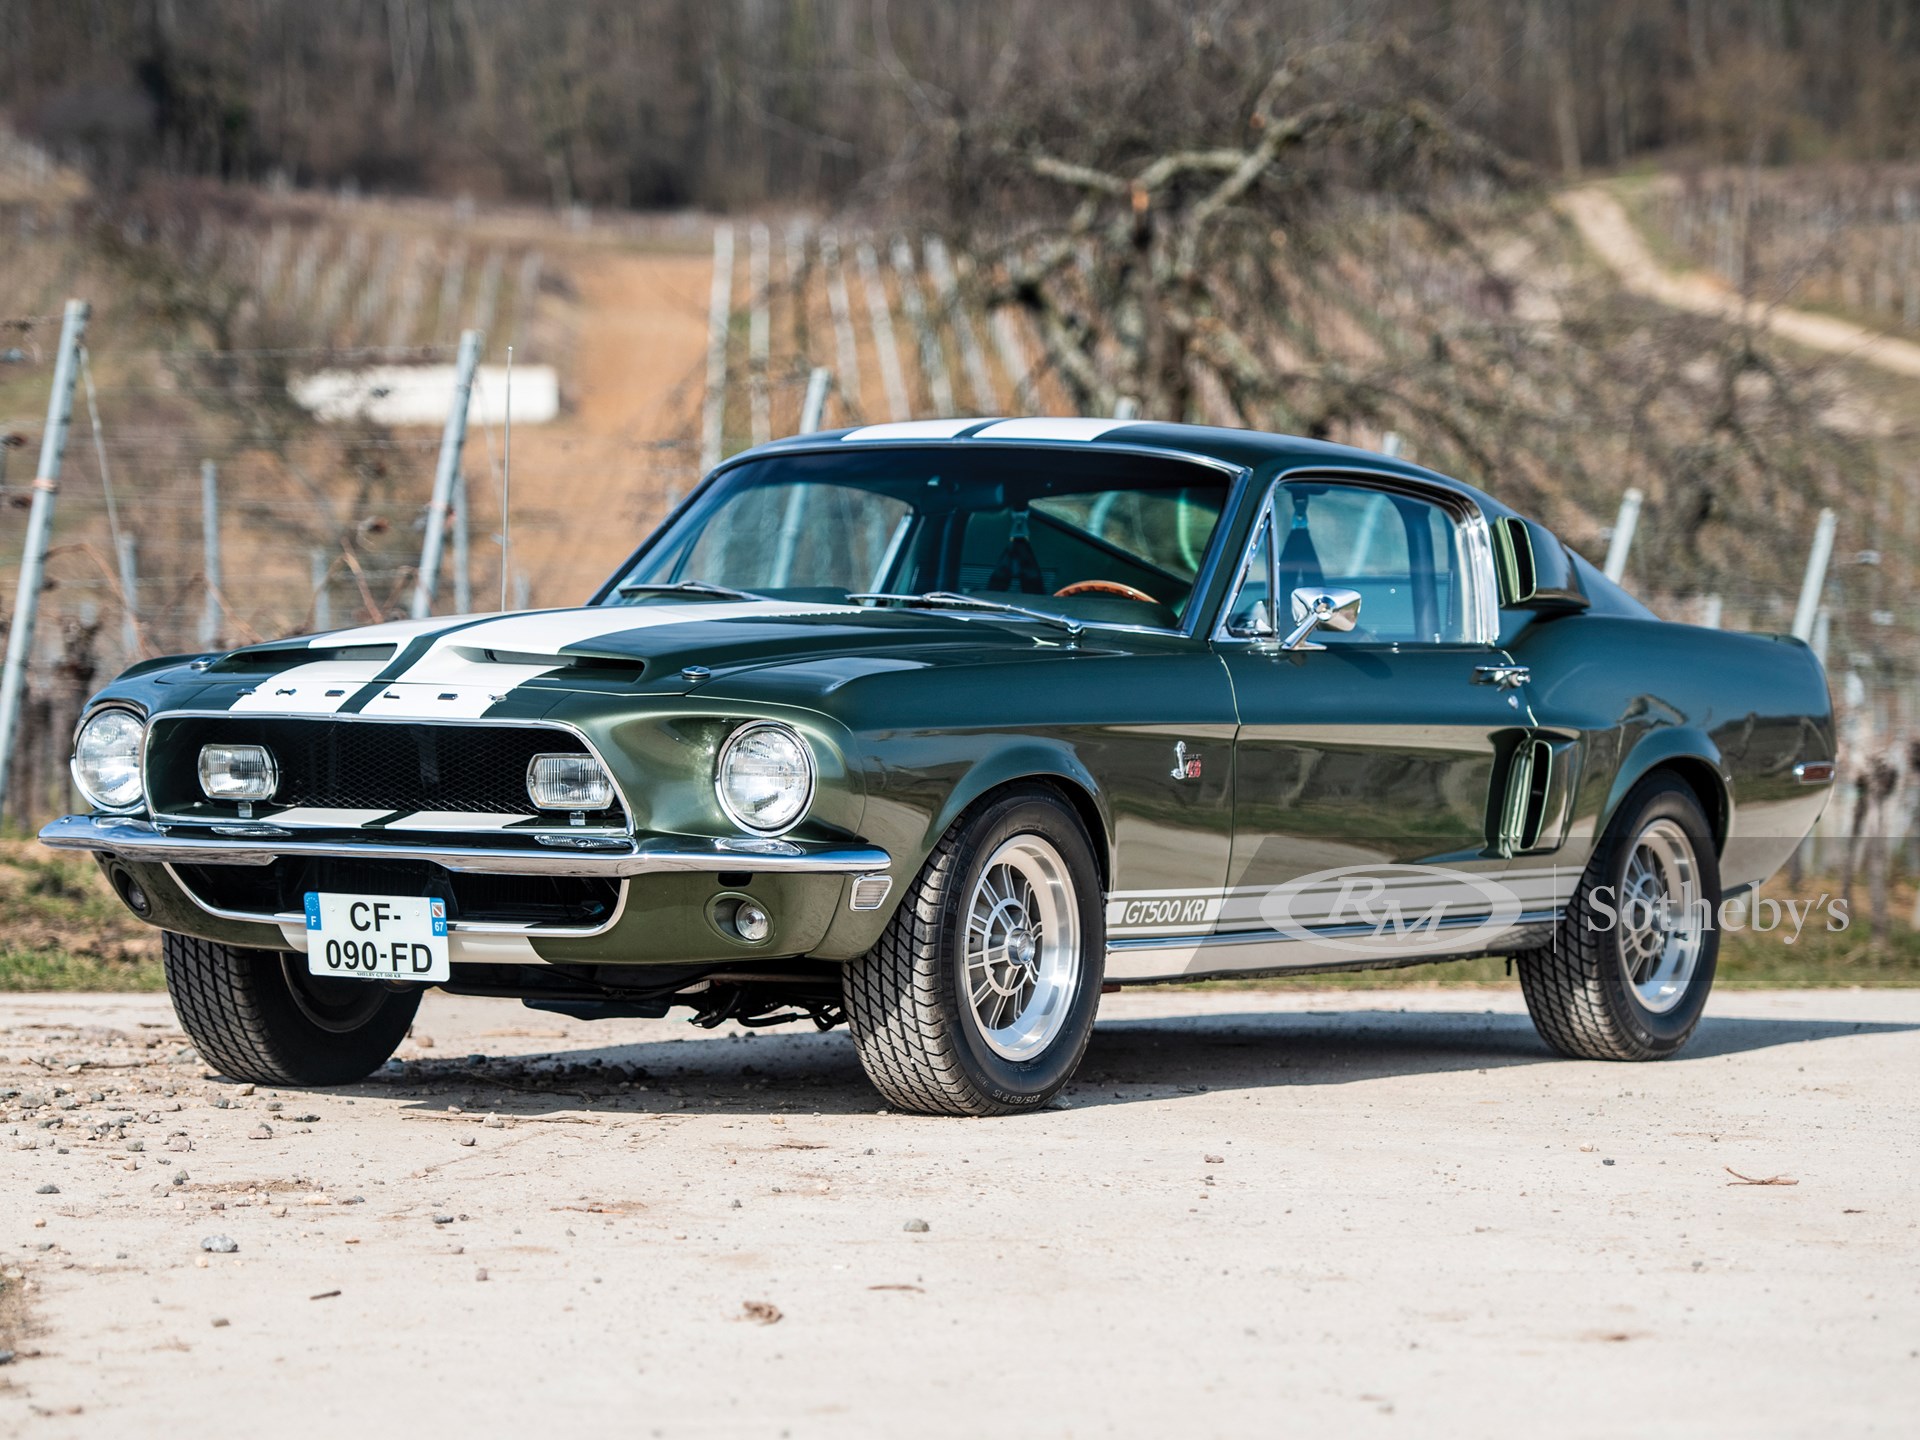 Gt 500 shelby 1968